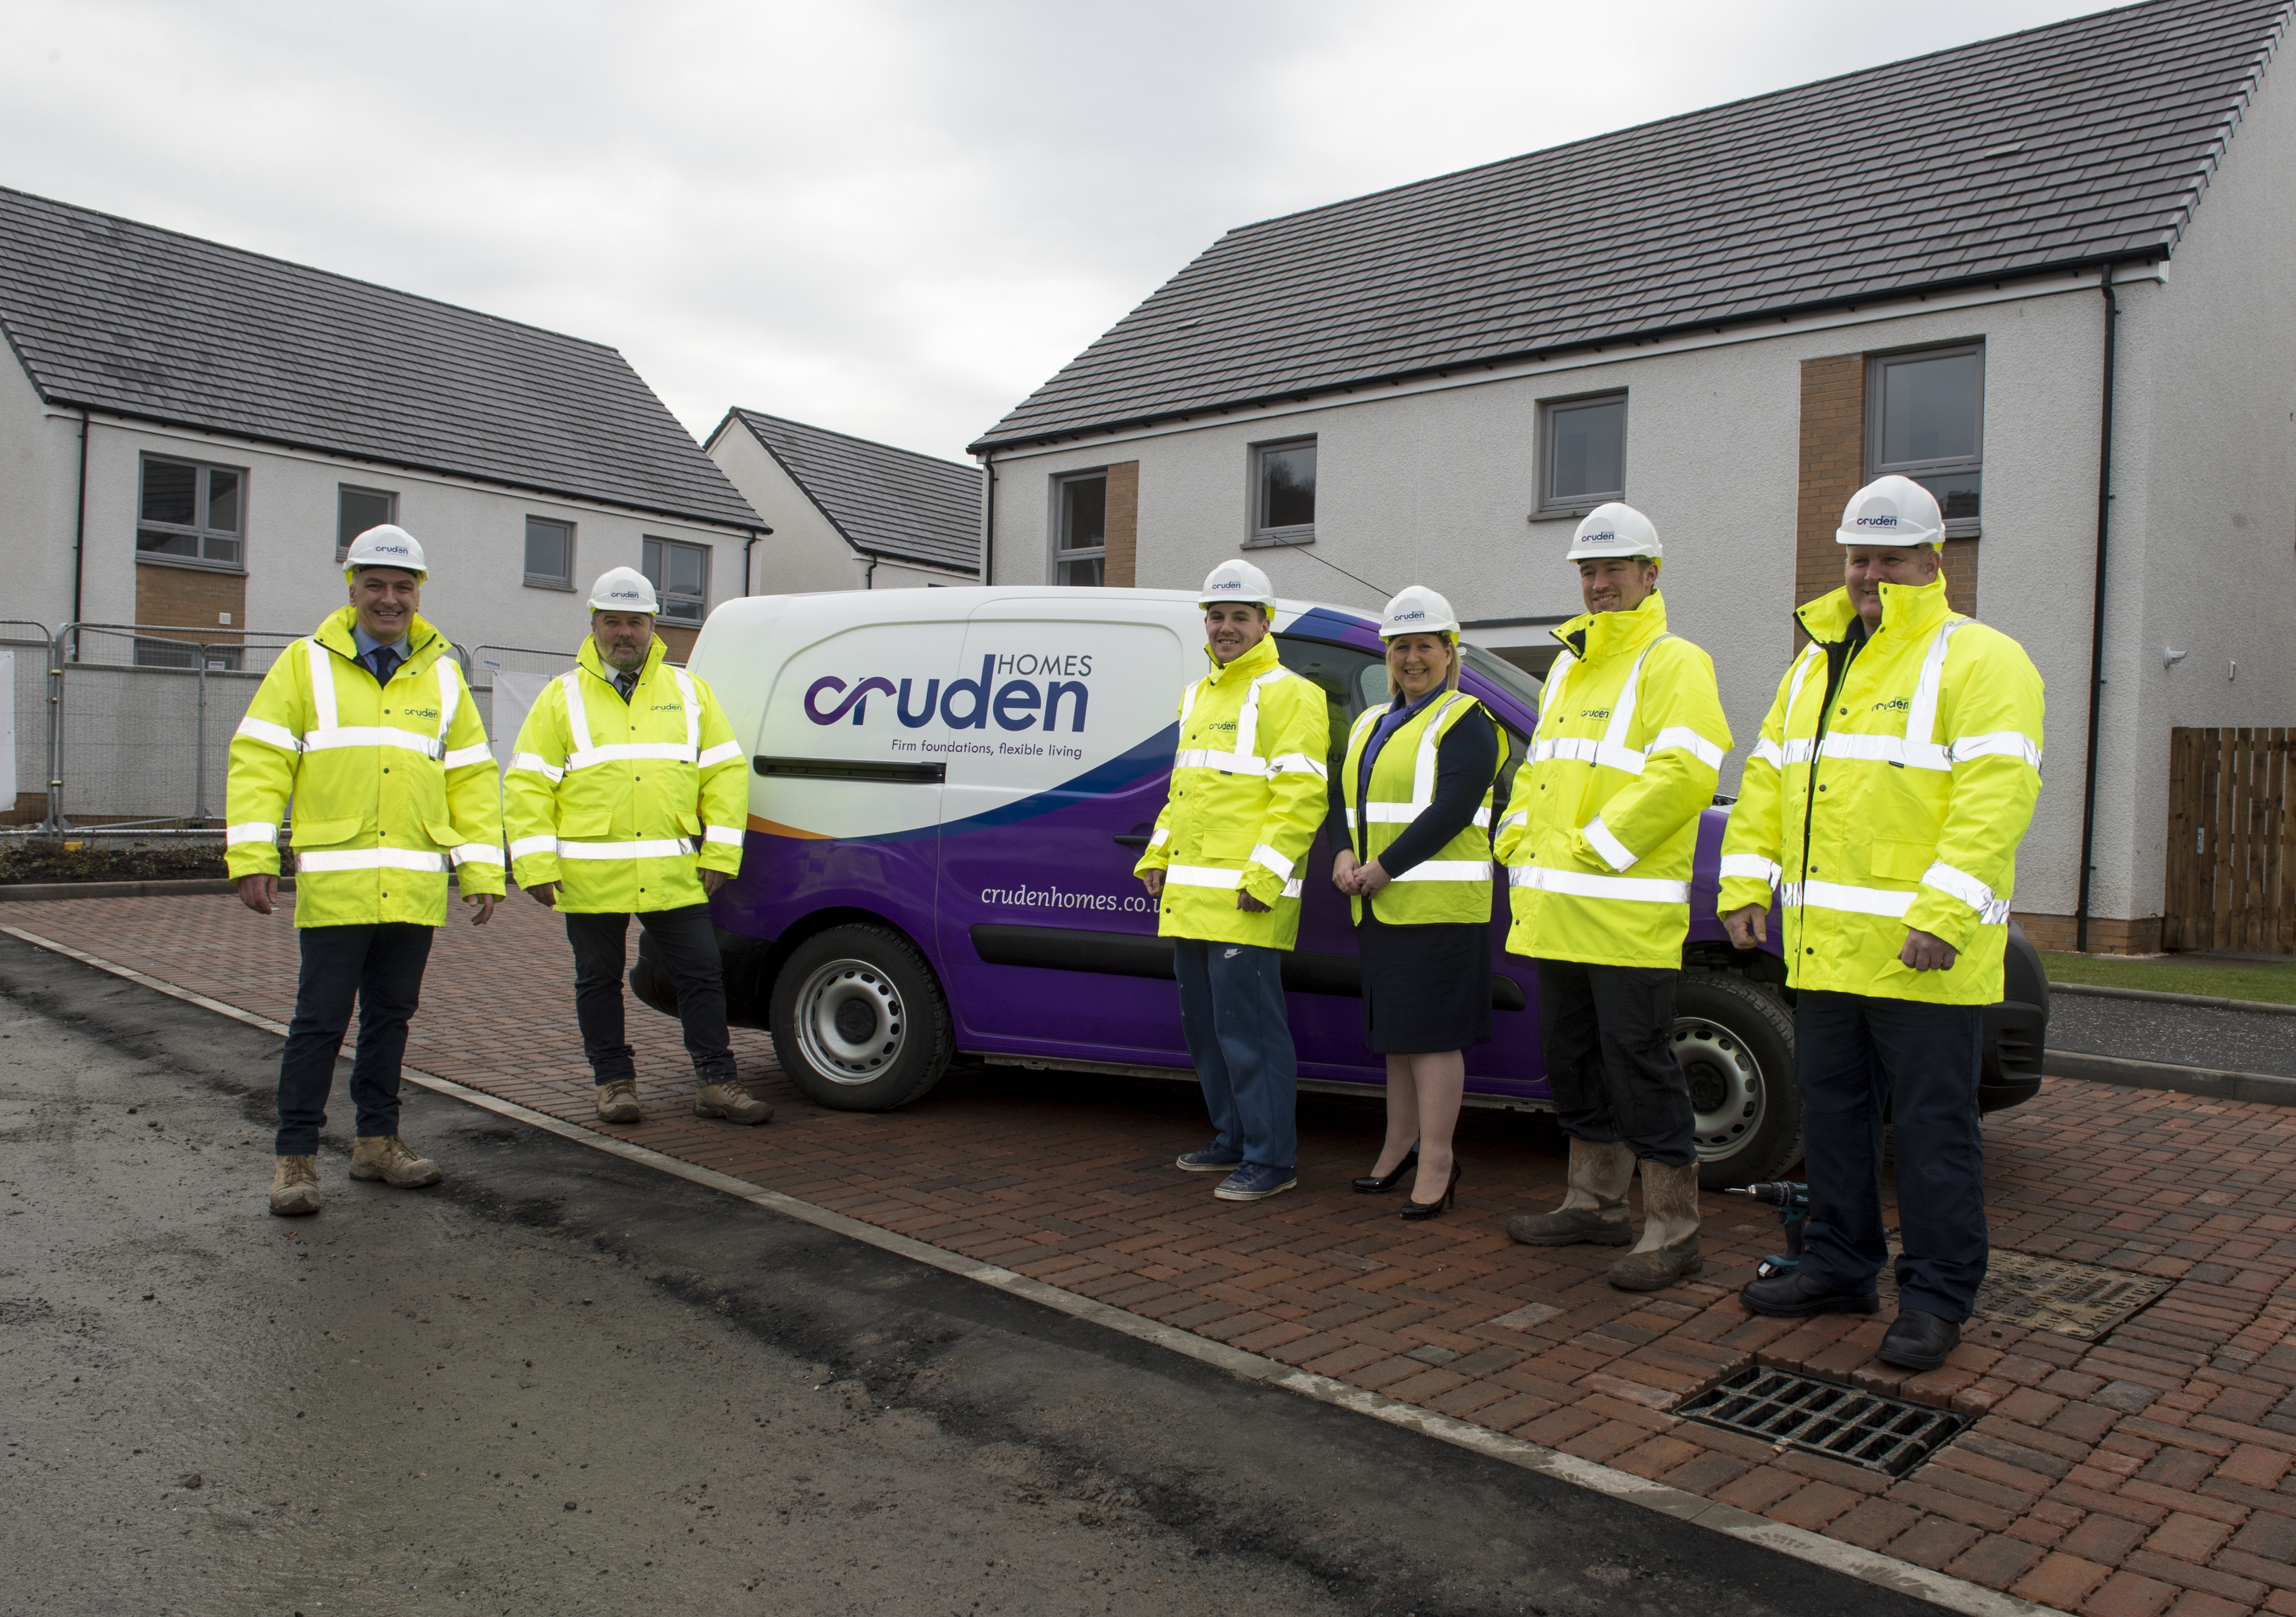 left to right: Iain Hunter, Site Manager; George Bagan, Assistant Site Manager; Craig Stevenson, Painter and Decorator; Audrey Sanders, Sales Adviser; Glen Sancroft, Assistant Site Manager; Stuart Dick, Customer Care Foreman.